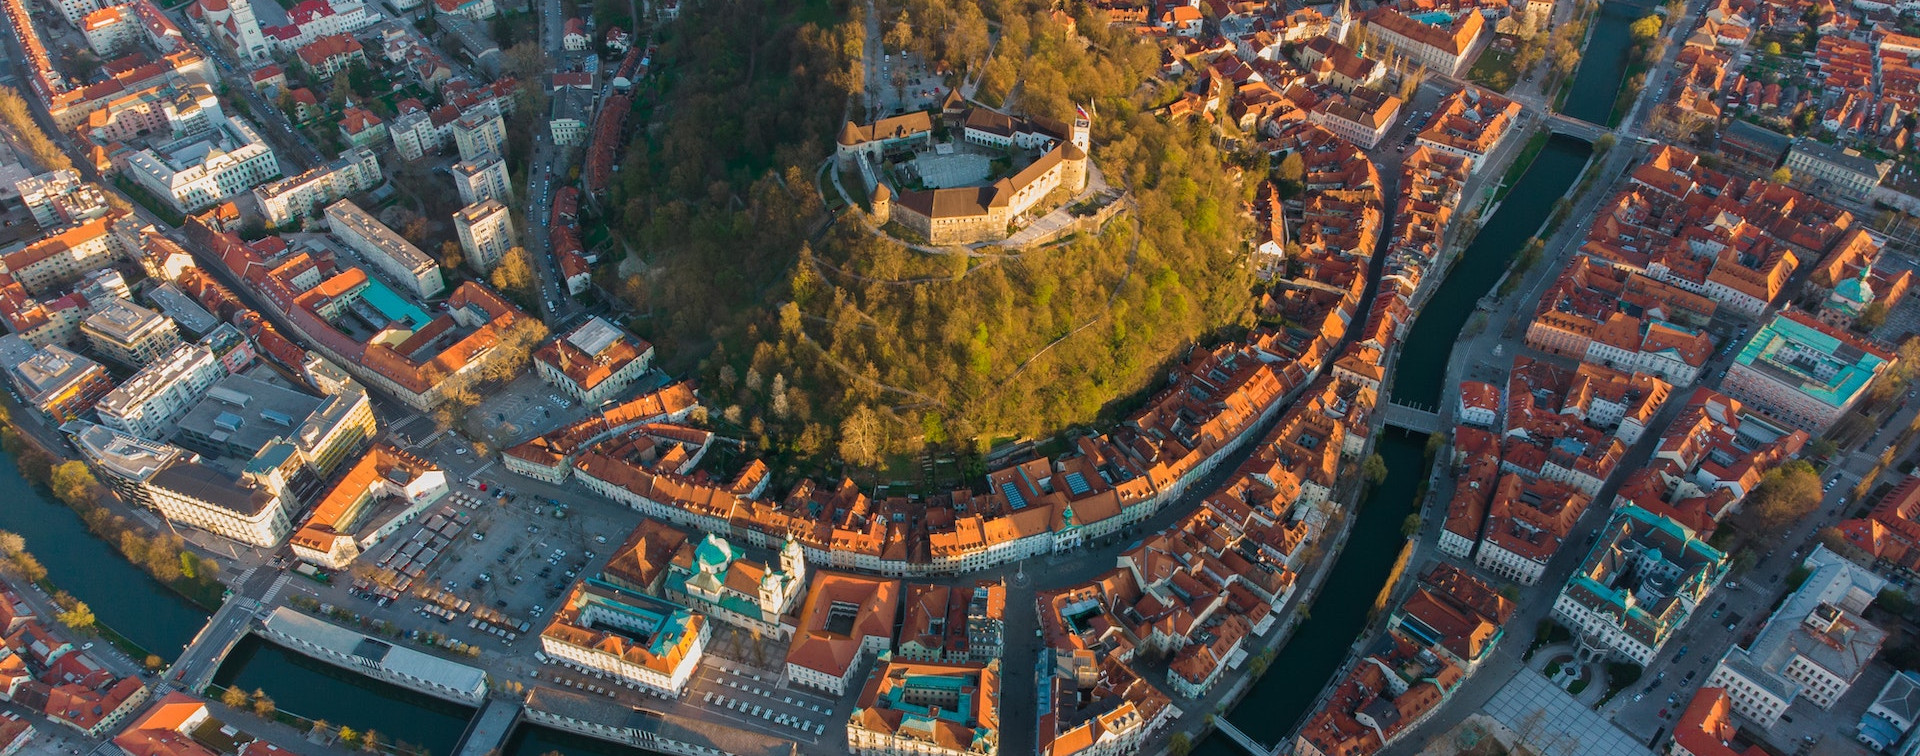 DLM Forum Members' Meeting in Ljubljana, 8-11 May 2023 - Call for papers open